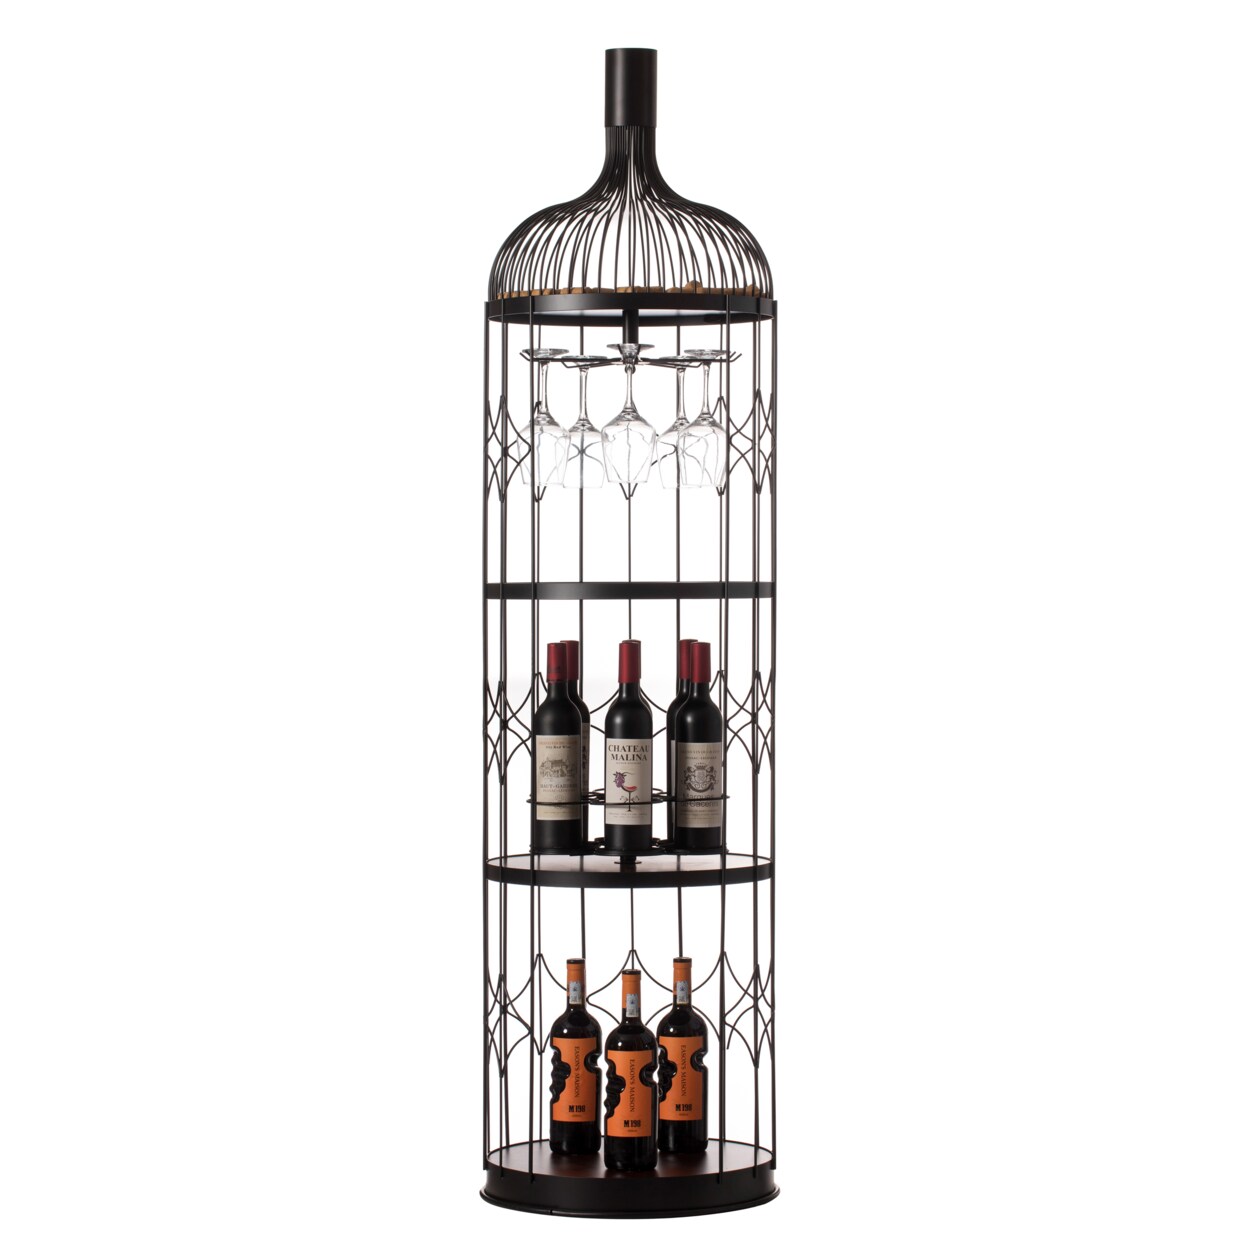 Vintiquewise Creative Bottle Shaped Black Wine Holder Rack Holder for Dining Room Office and Entryway